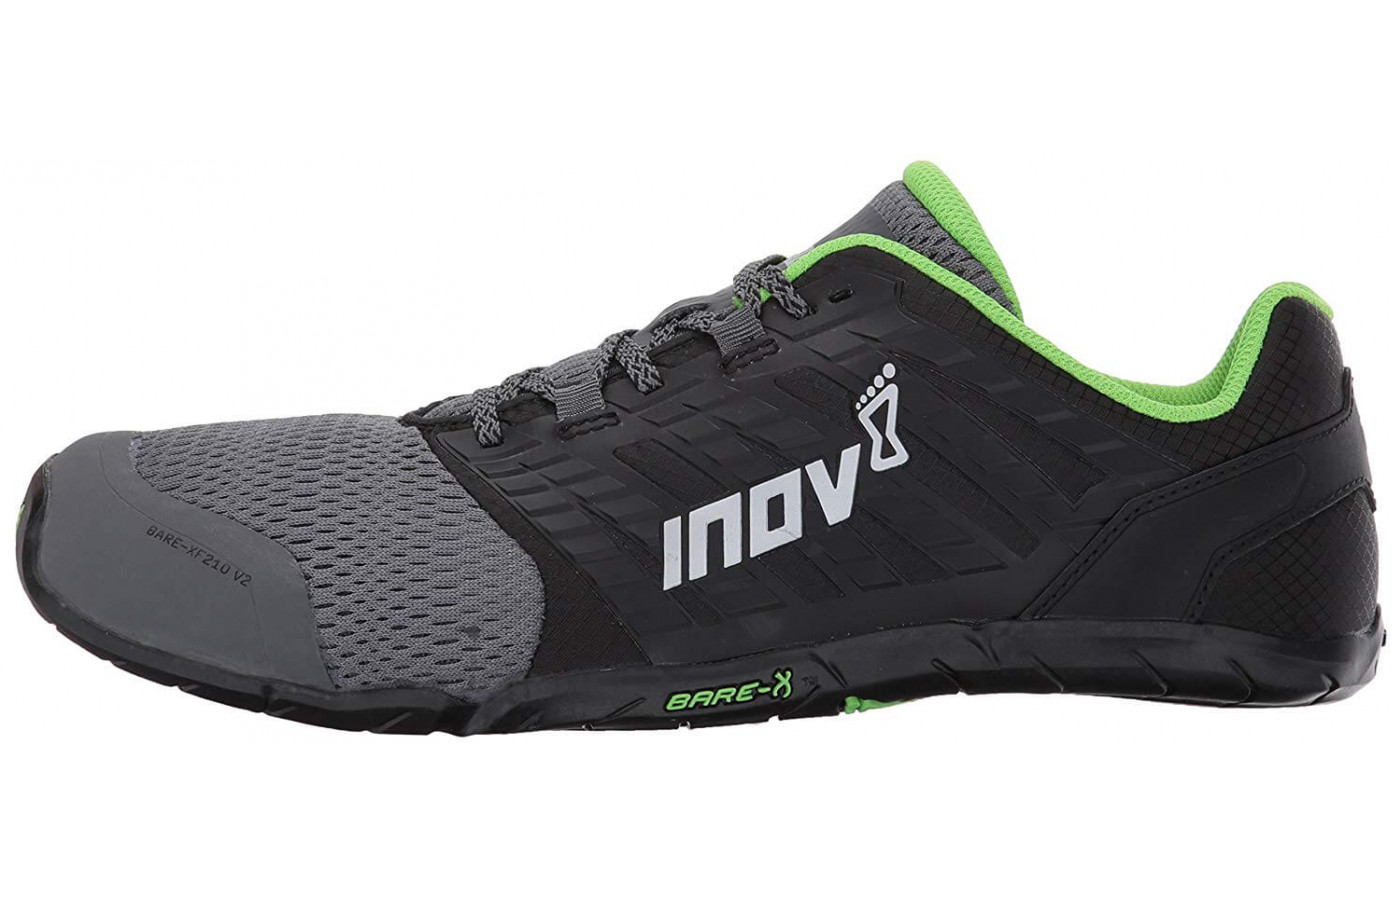 Instead of a midsole, the Bare-XF 210 v2 has a 3mm Power Footbed insole